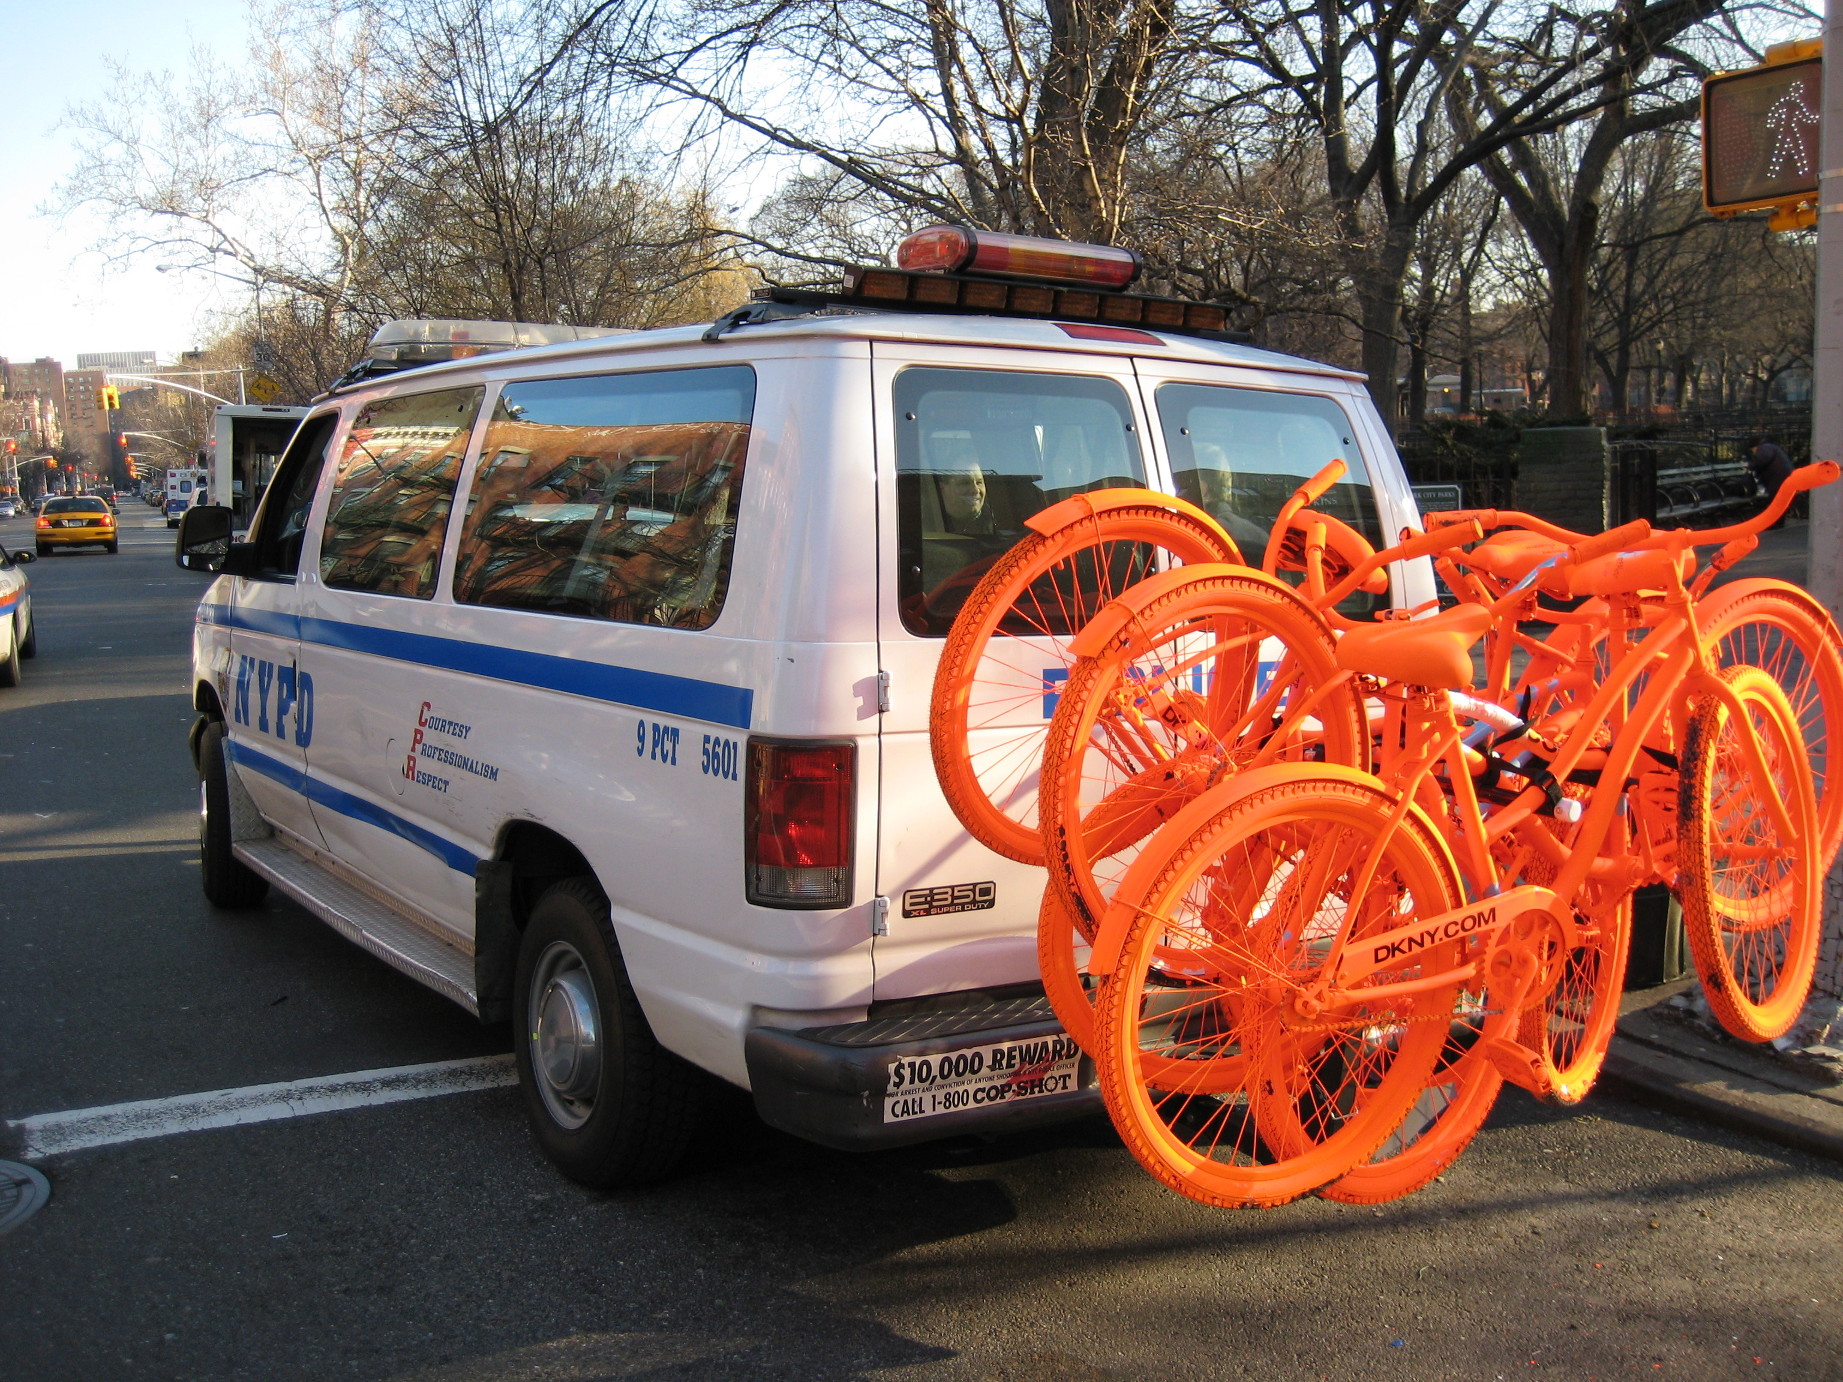 NYPD Van with five orange DKNY bikes on the back